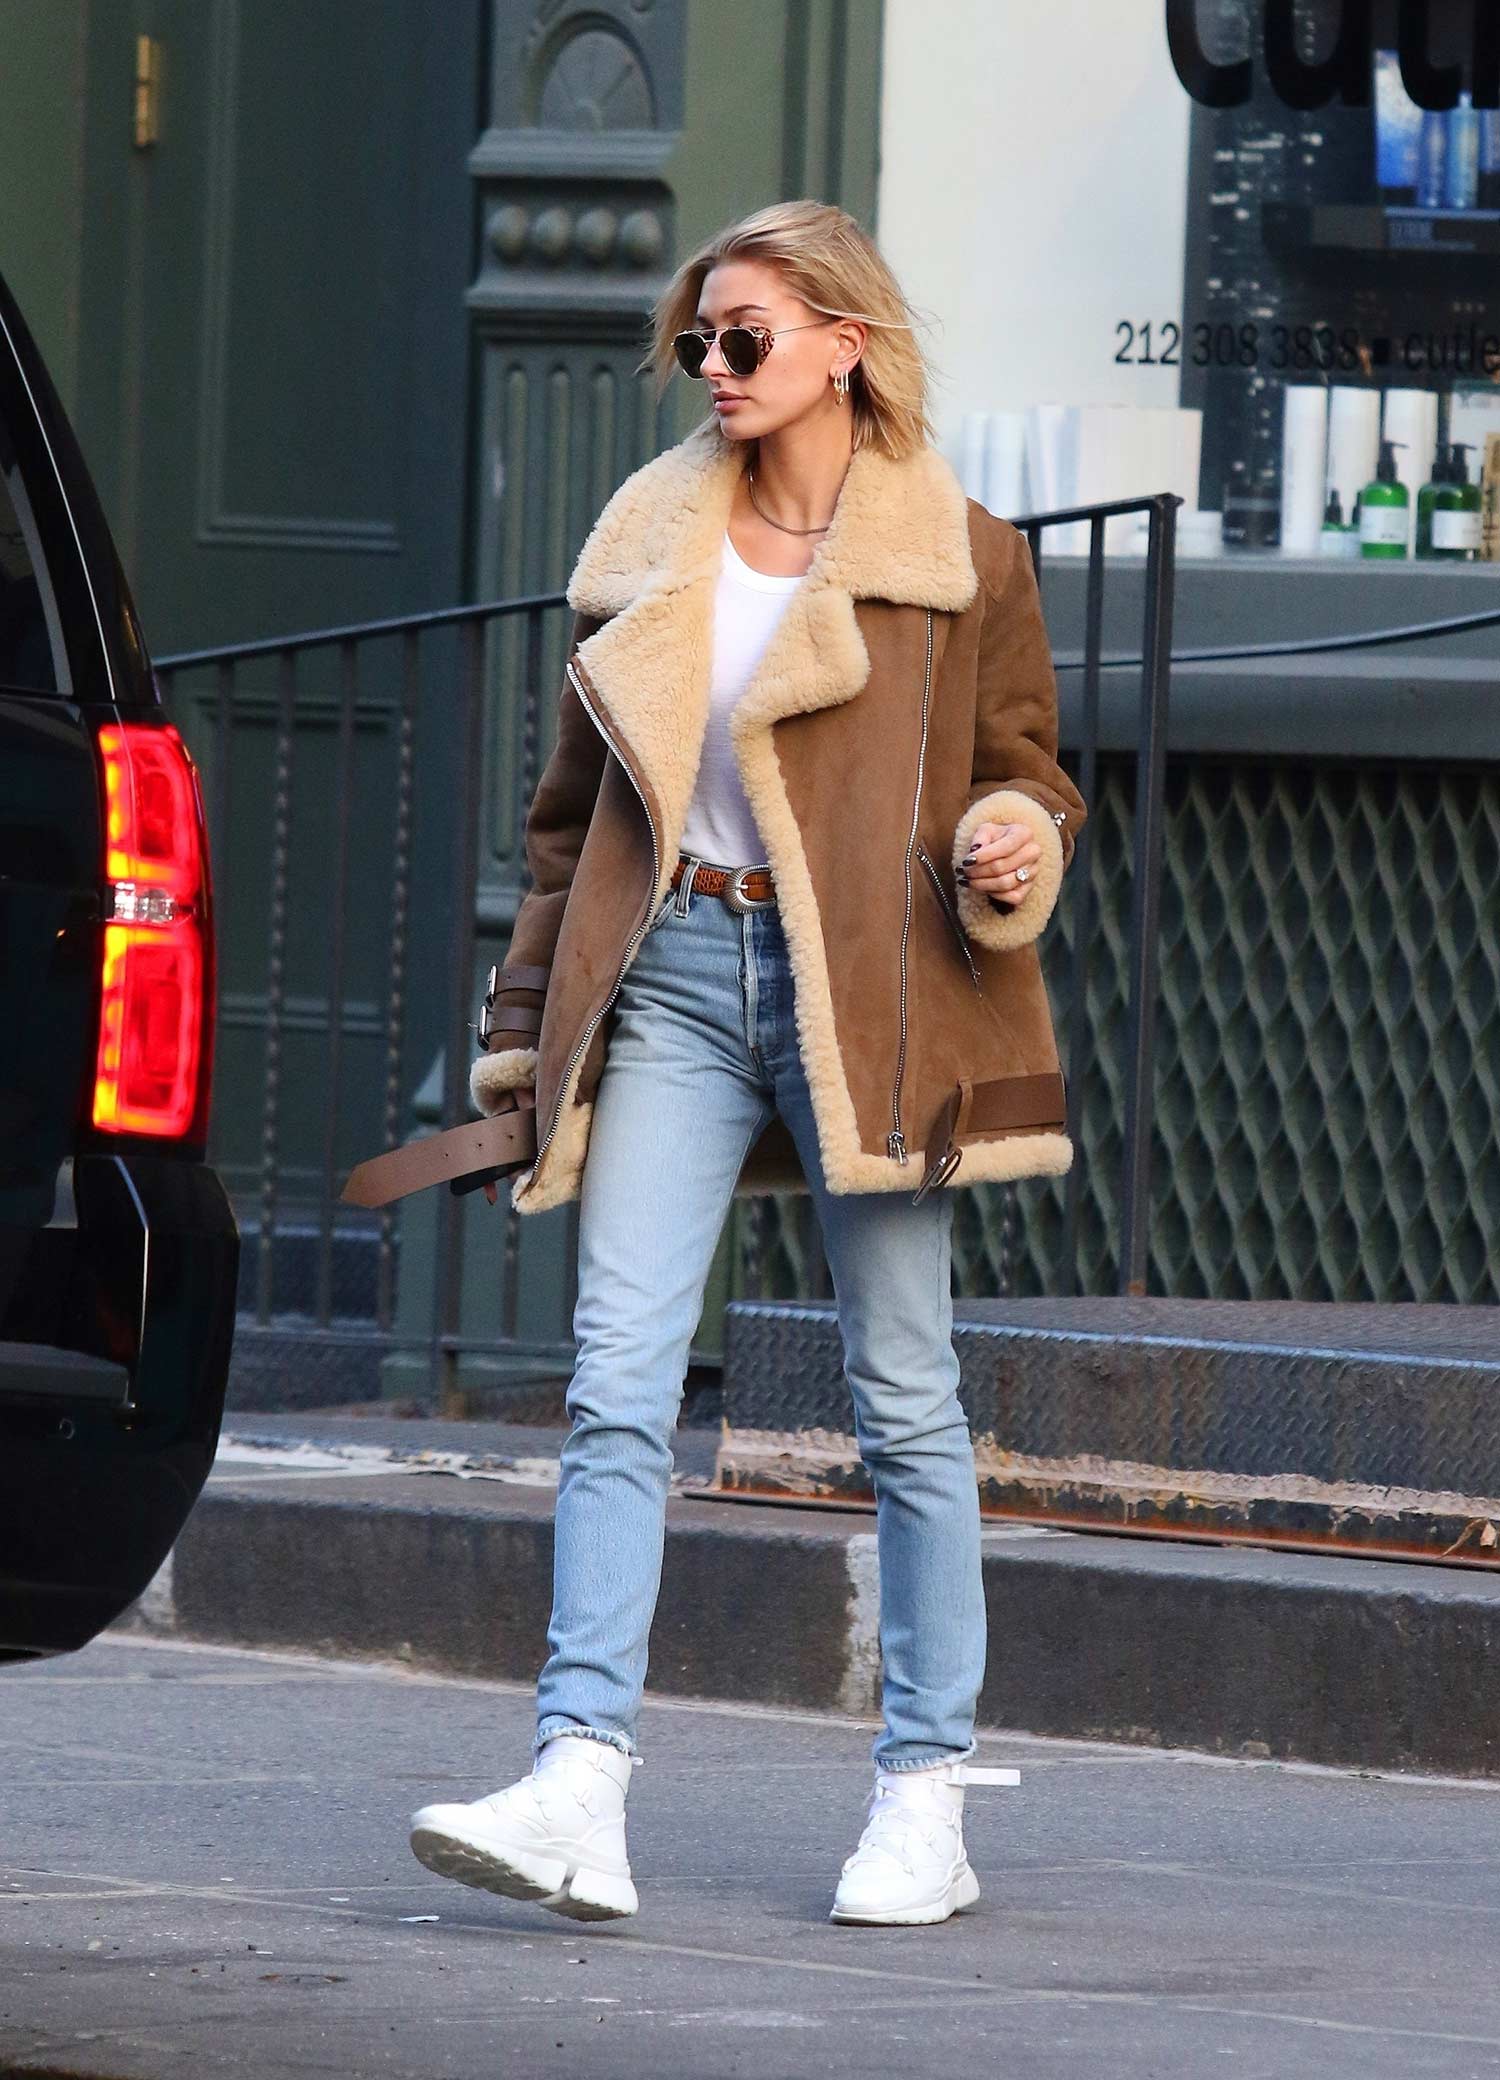 Hailey Baldwin Wears RE/DONE Levi's Skinny Jeans - THE JEANS BLOG